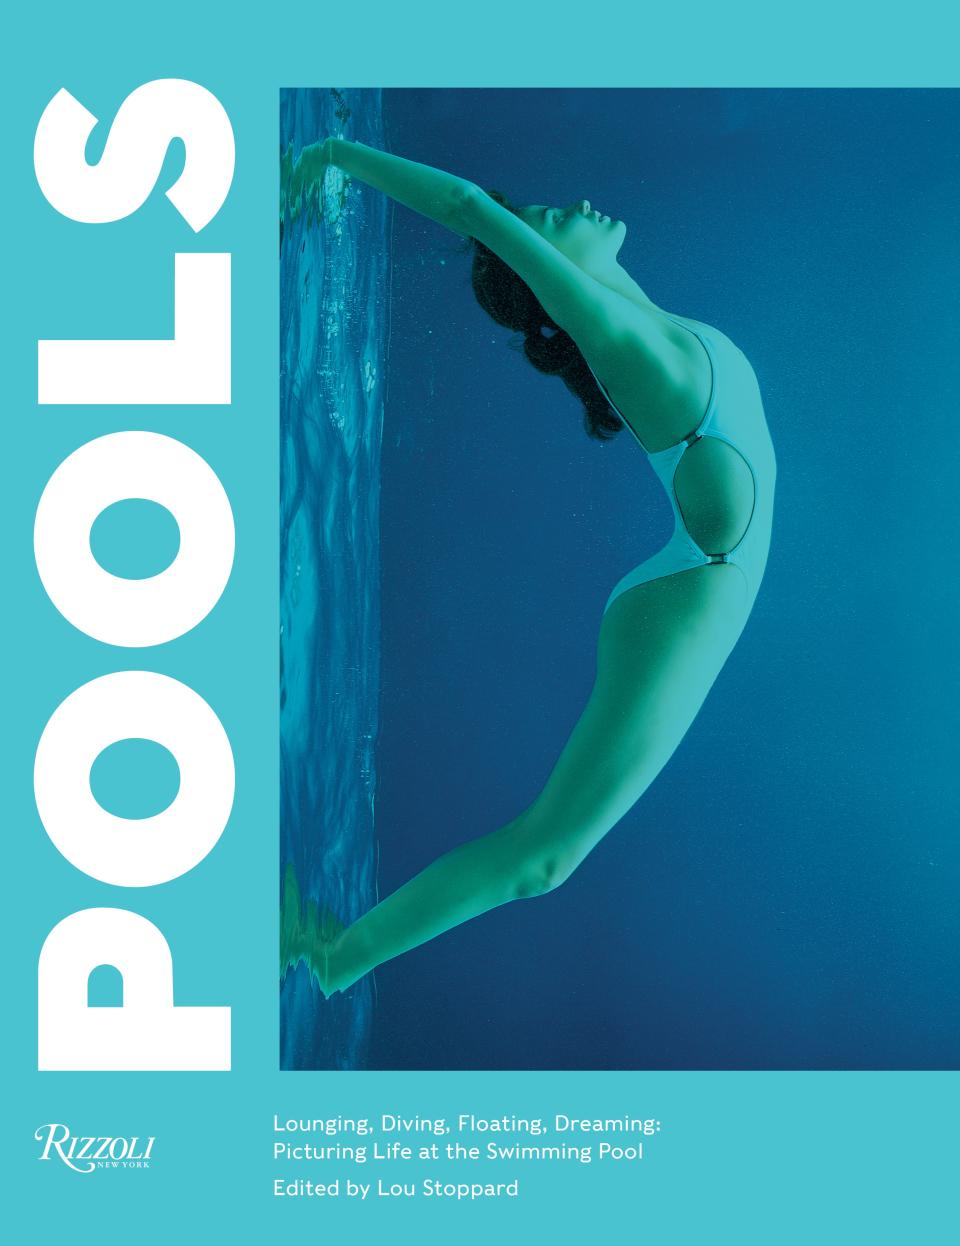 Sølve Sundsbø, Think Tanks, Frank, June 1998, on the cover of Pools: Lounging, Diving, Floating, Dreaming: Picturing Life at the Swimming Pool. “The cover image of the book was shot by Sølve Sundsbø in the 1990s,” says Stoppard. “I asked him why the pool is so popular in photography and he said, ‘It almost invites you to take a photograph. It’s a premade studio.’ I think that’s very true.”